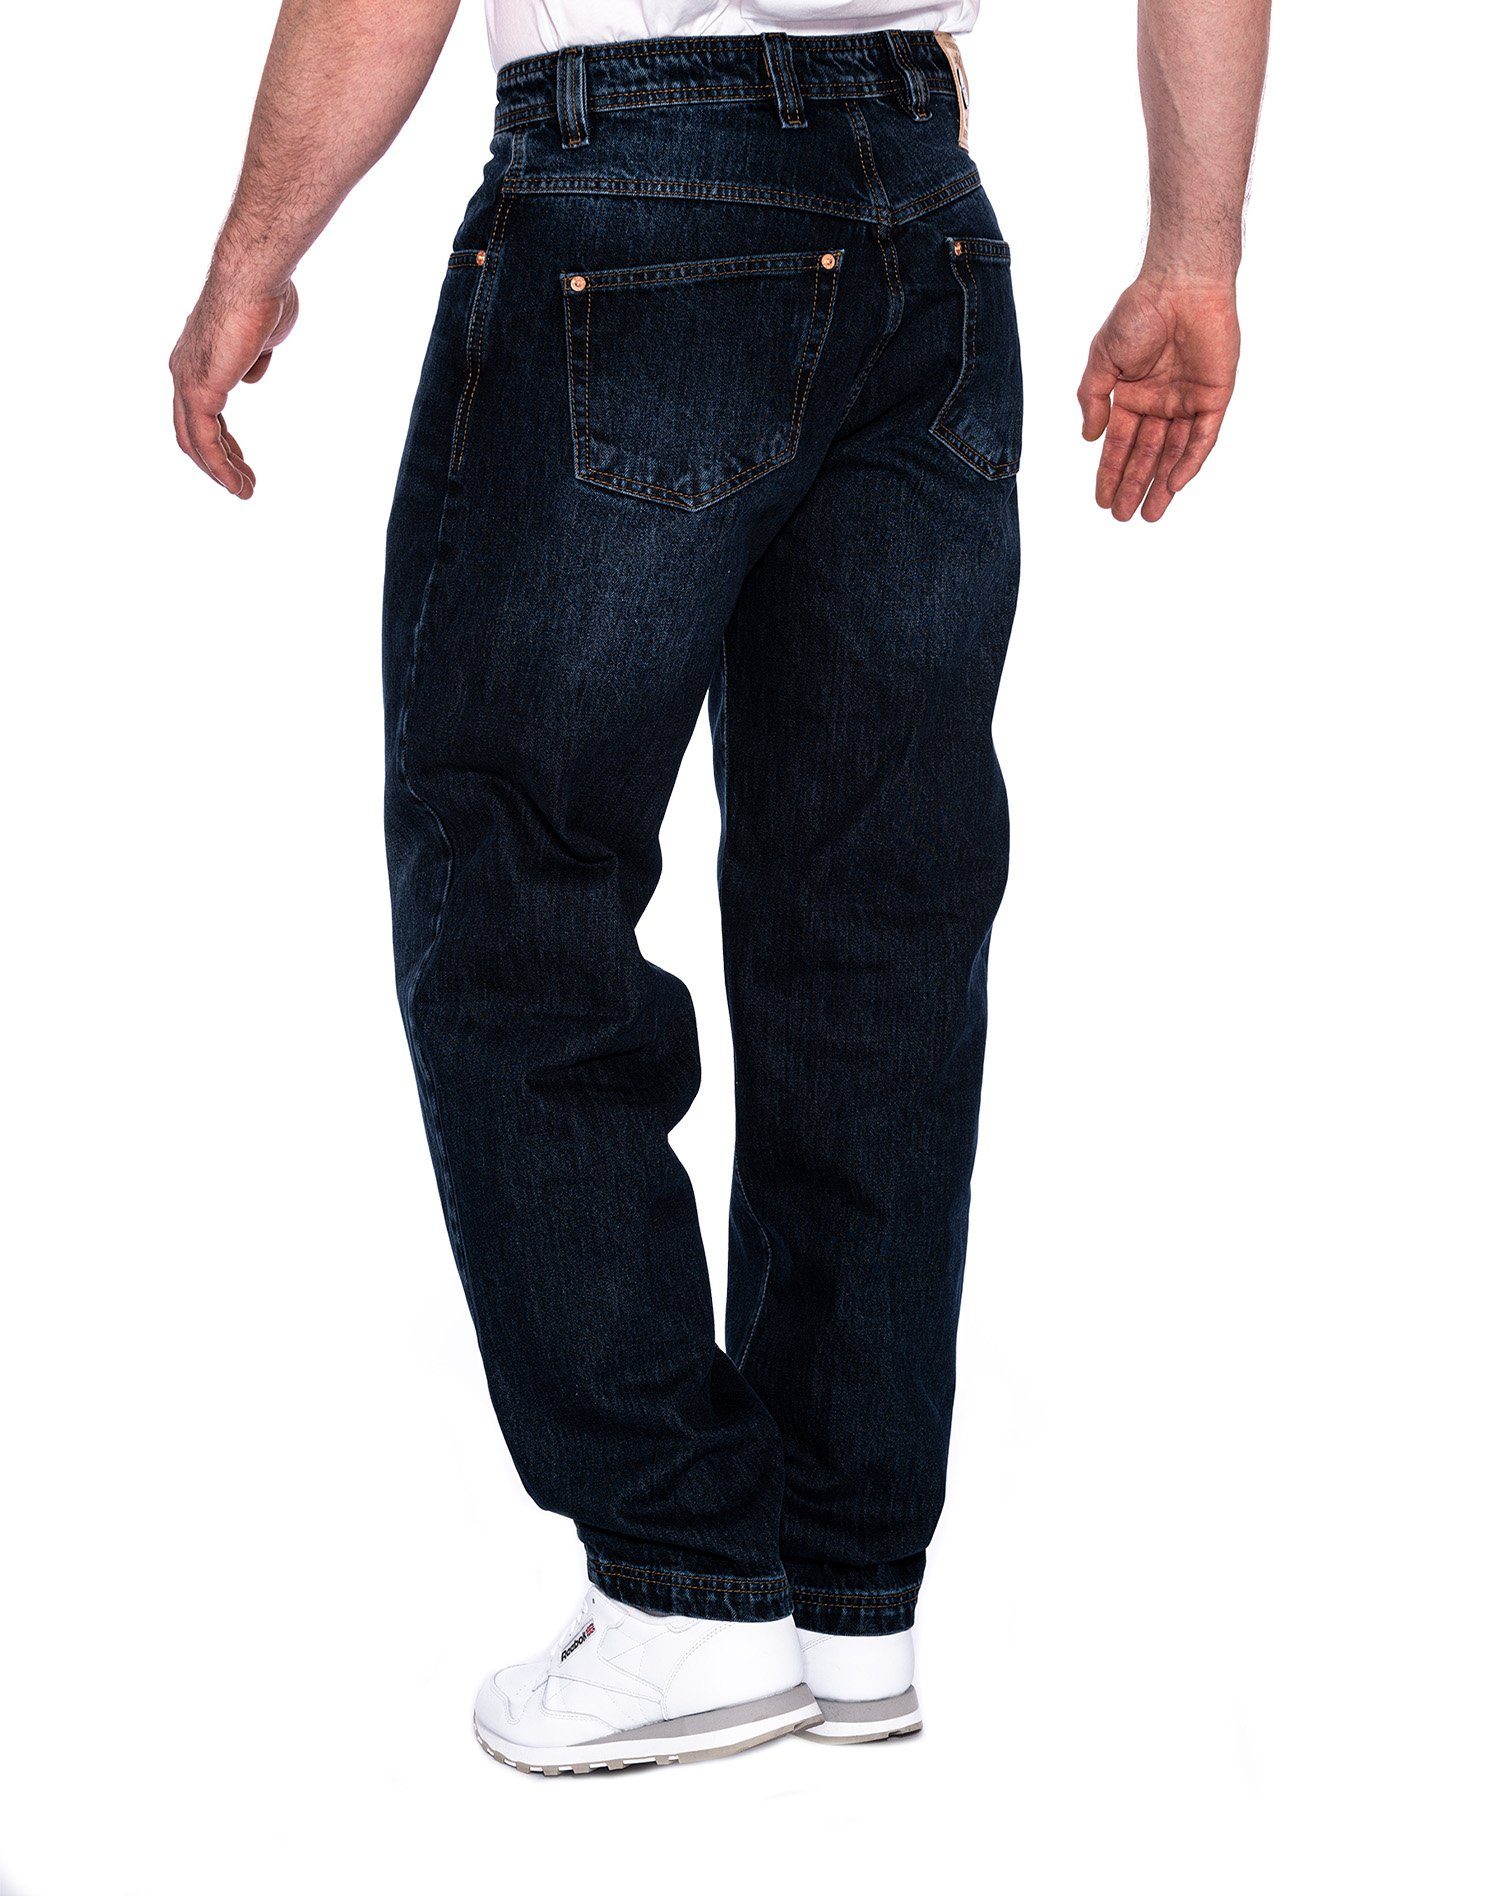 Jeans PICALDI Jeans Five Fit, Zicco Jeans Pocket Weite Loose Hurricane 471